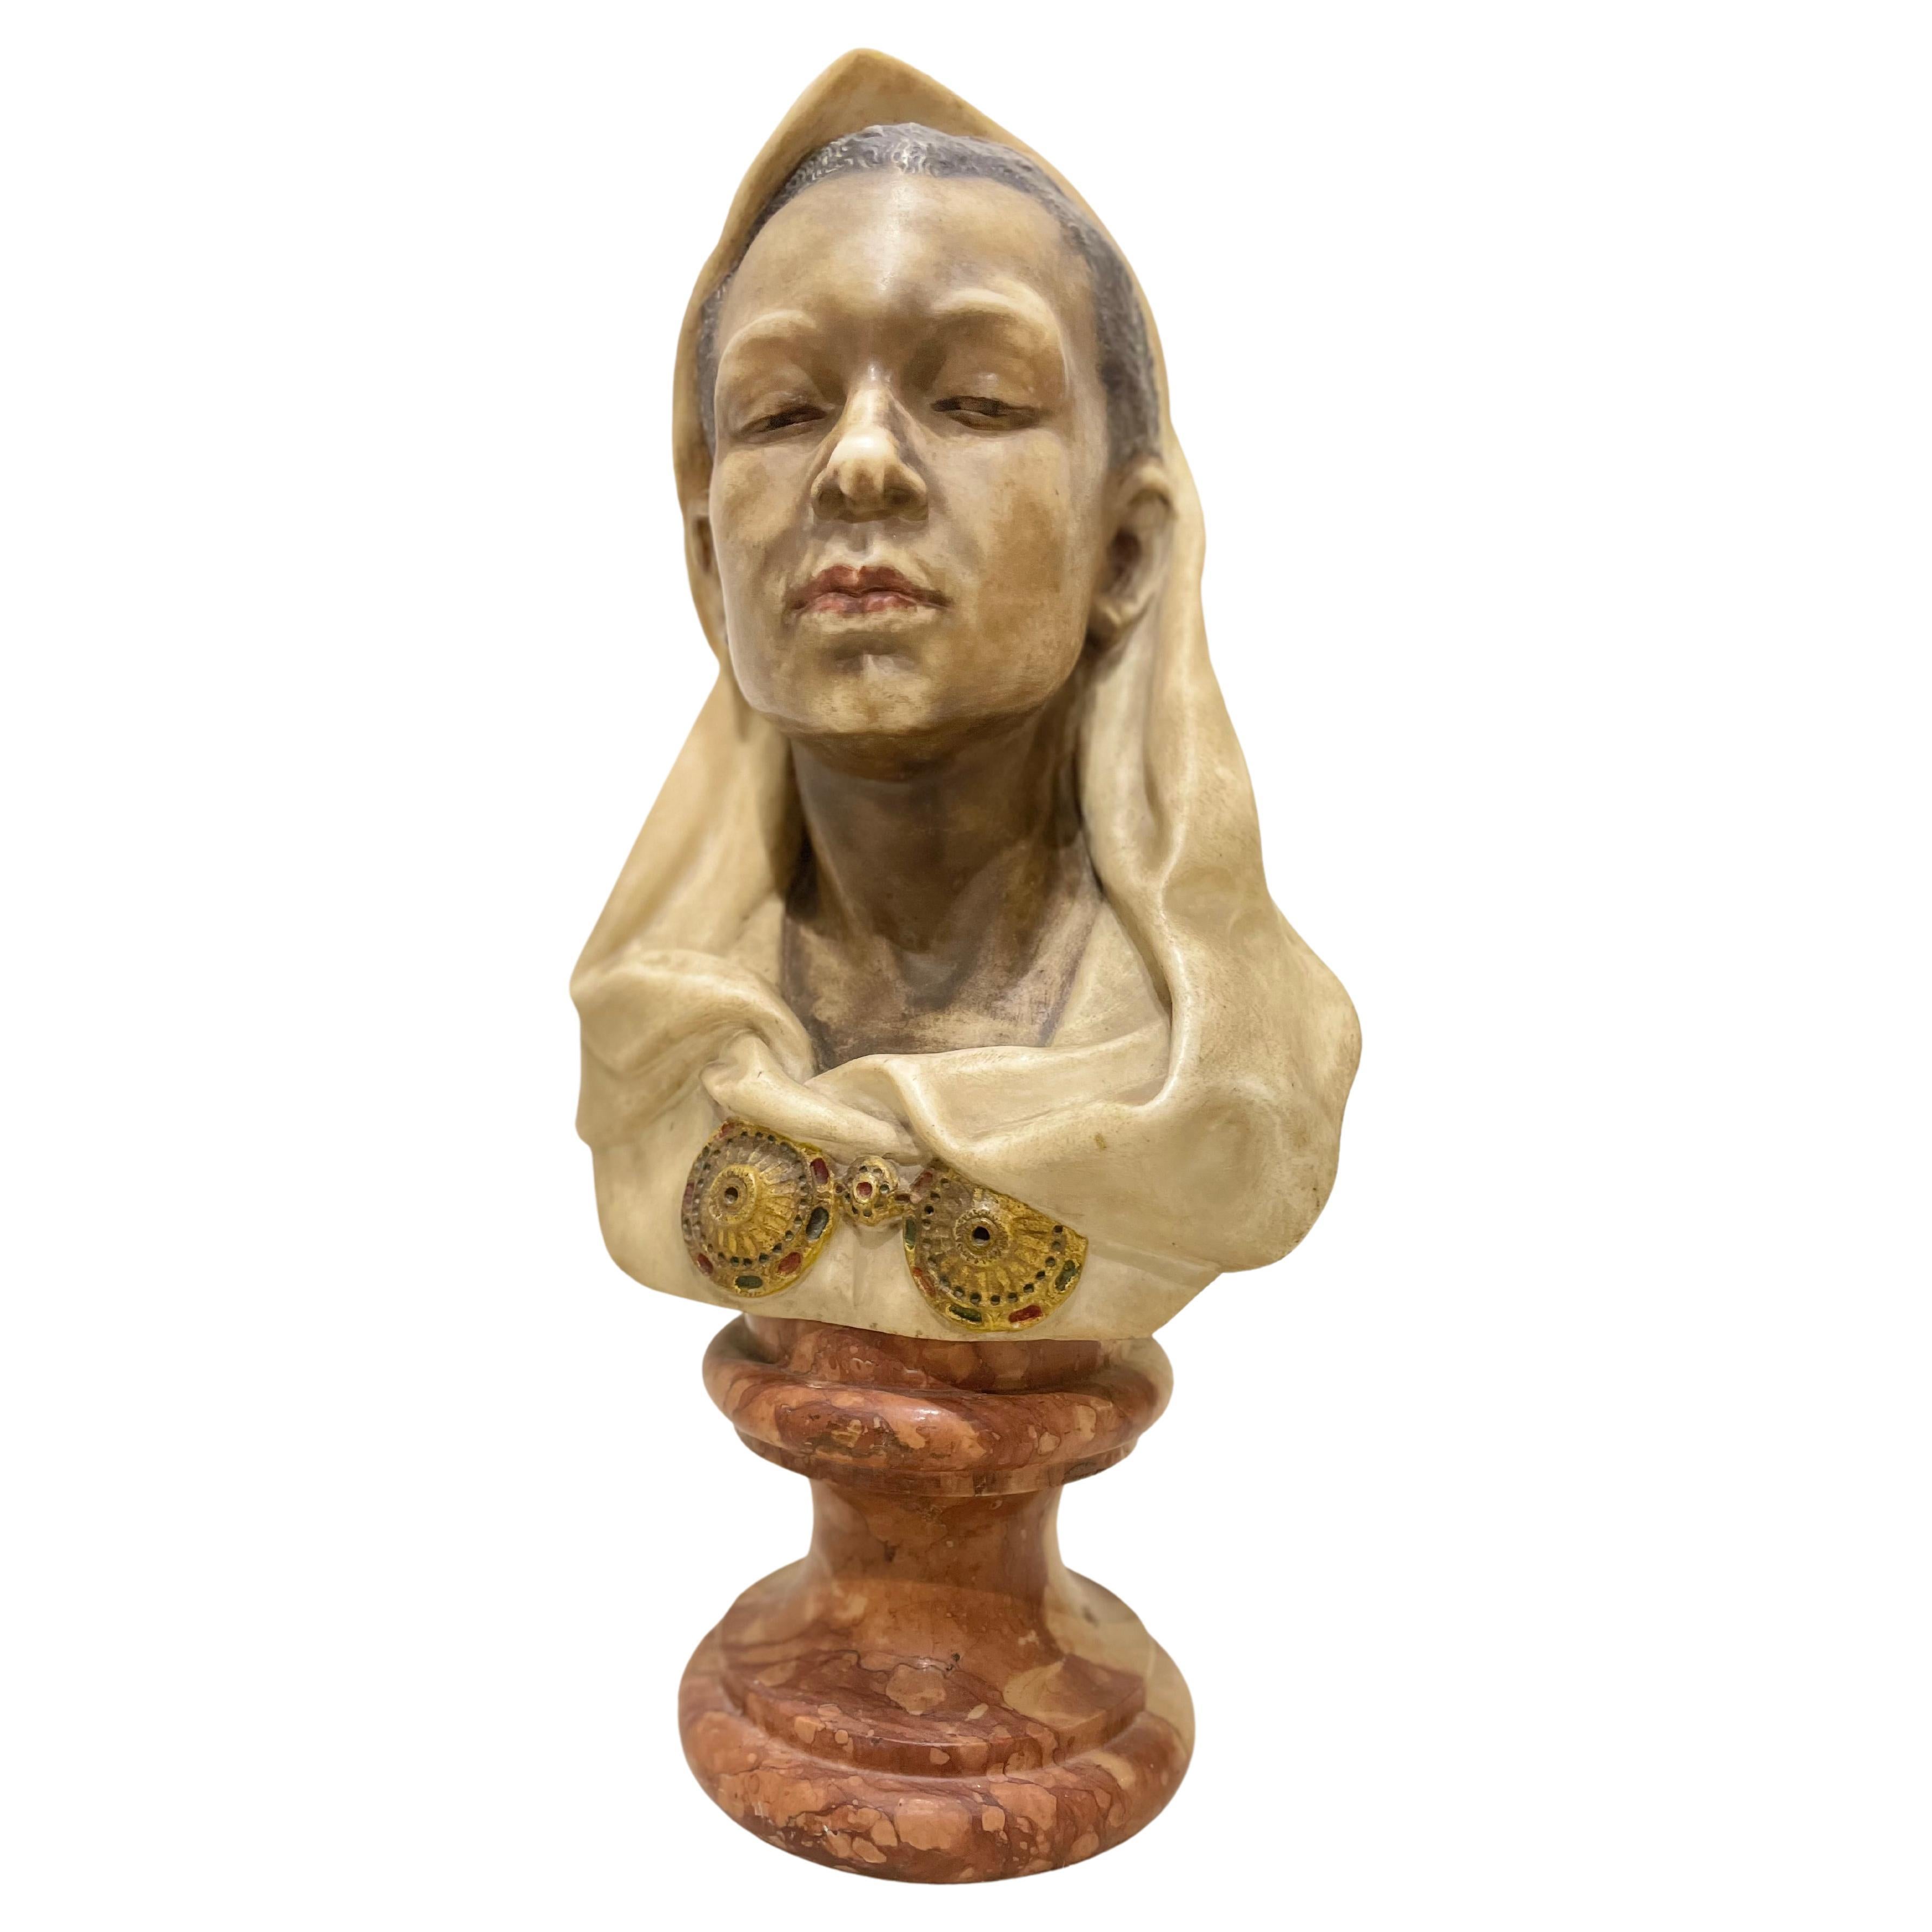 Carrare Bust Nubian Polychrome Late 19th Century Signed Marchetti